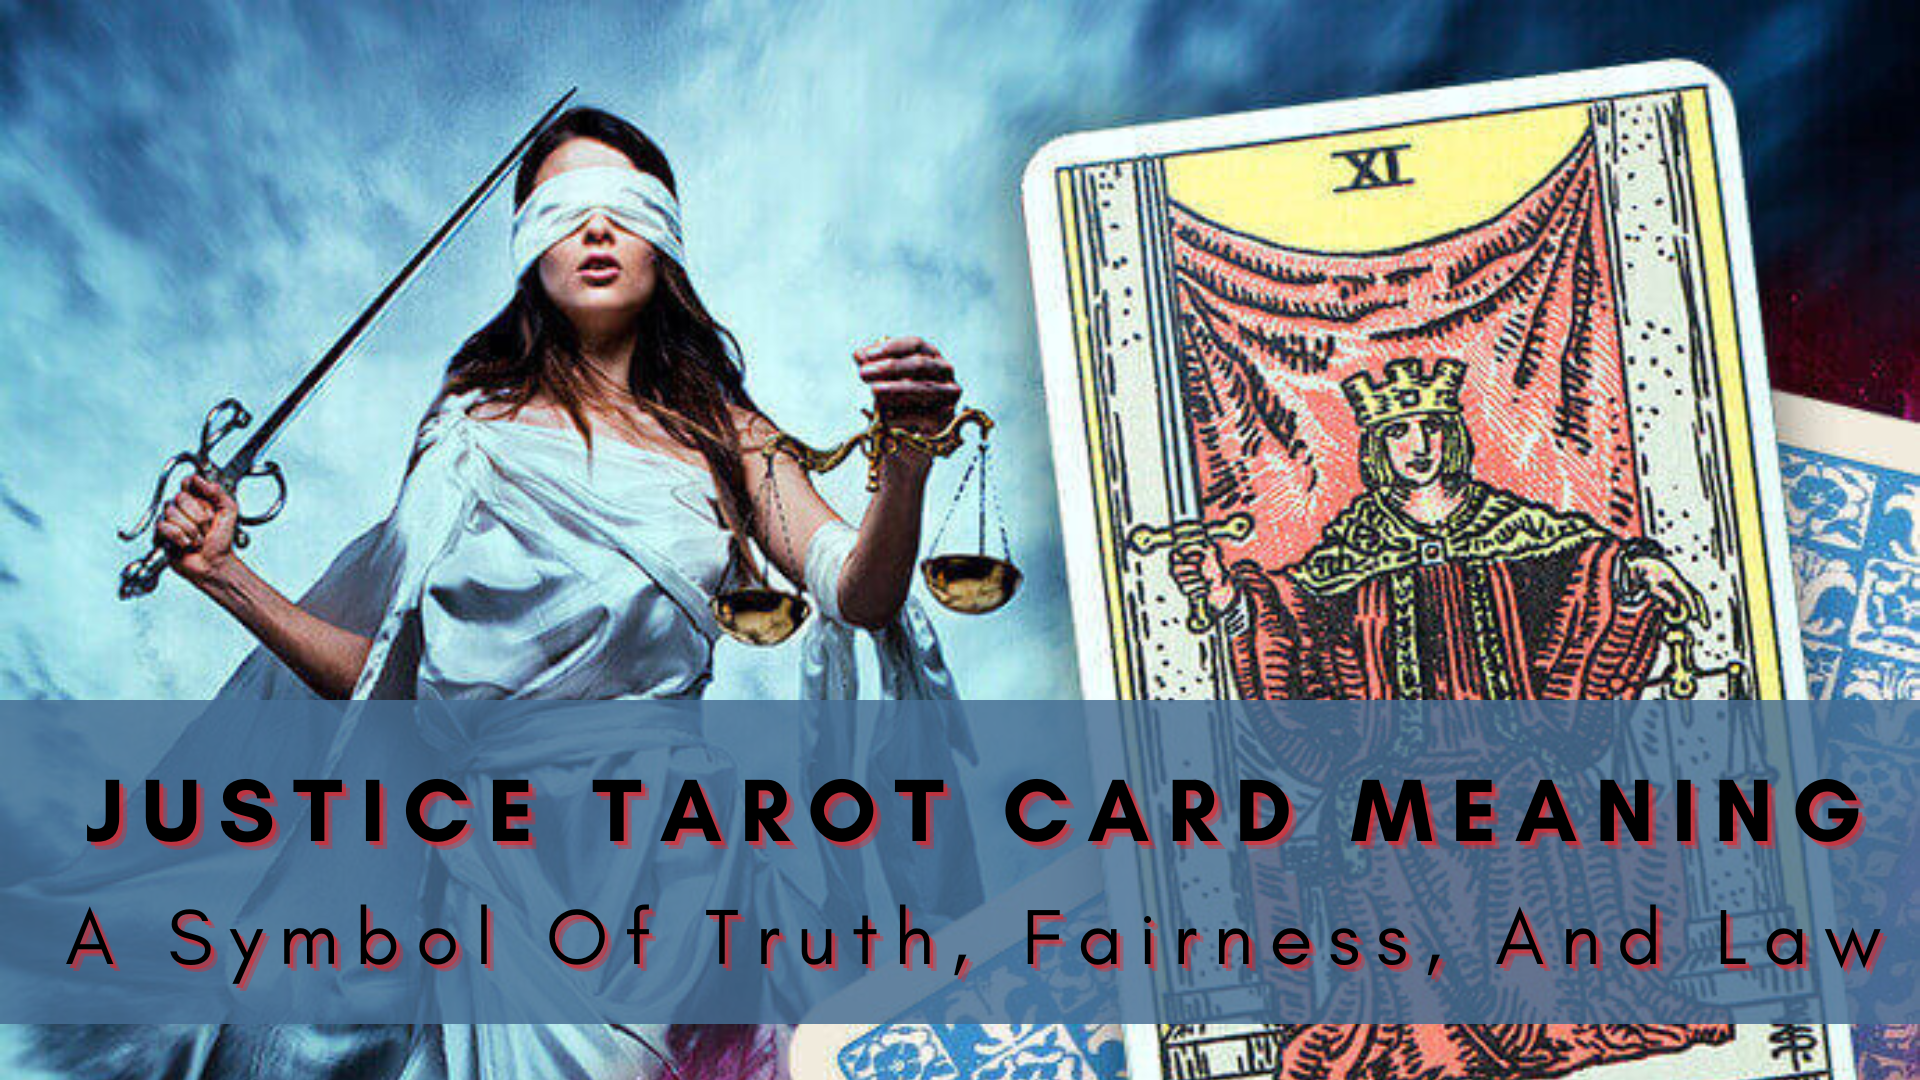 Justice Tarot Card Meaning - A Symbol Of Truth, Fairness, And Law